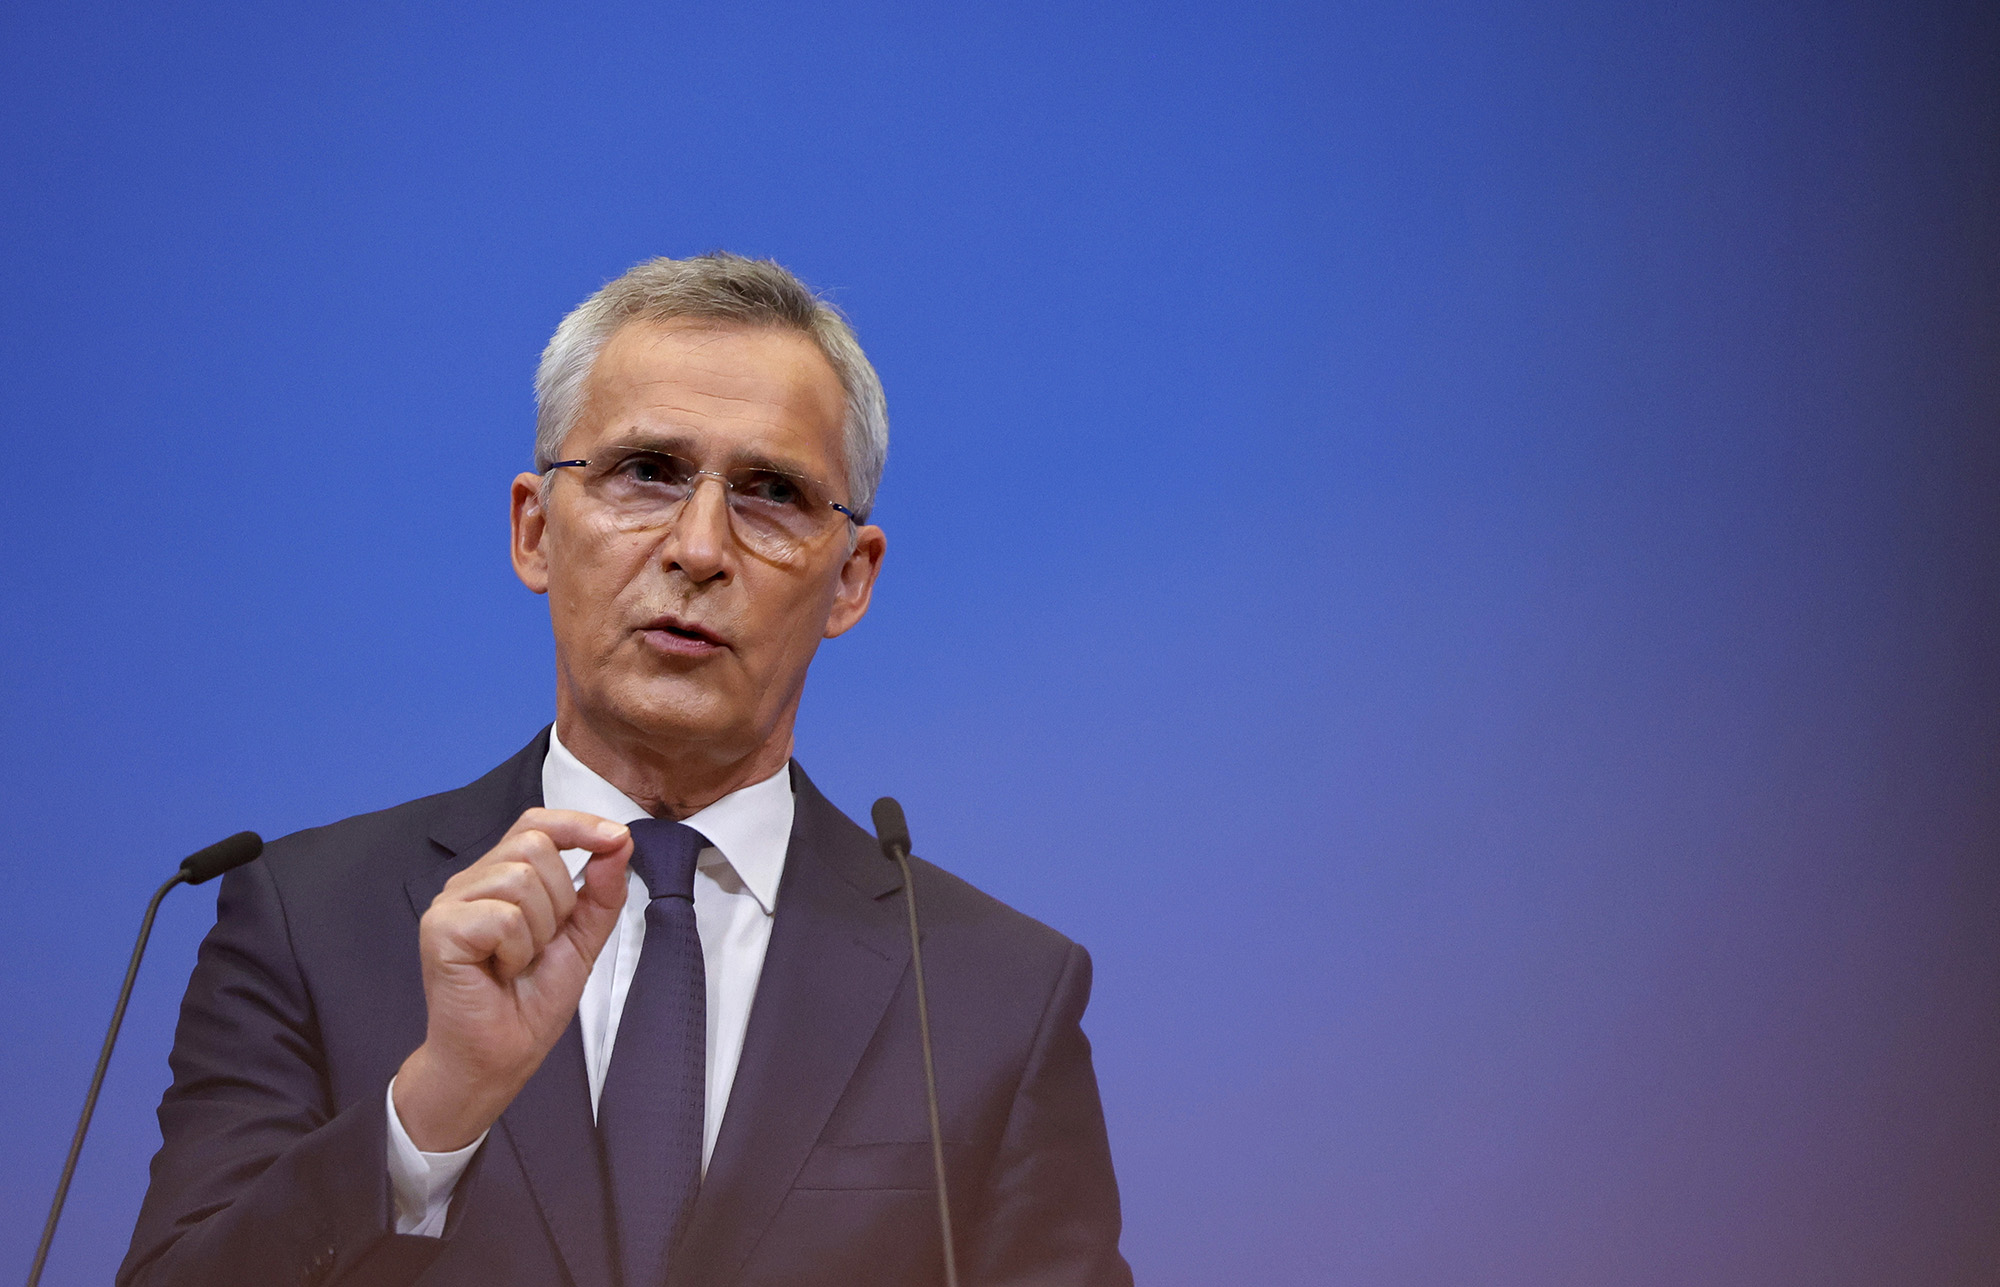 NATO's military assistance to Ukraine not a provocation, but support for independent state, Stoltenberg says